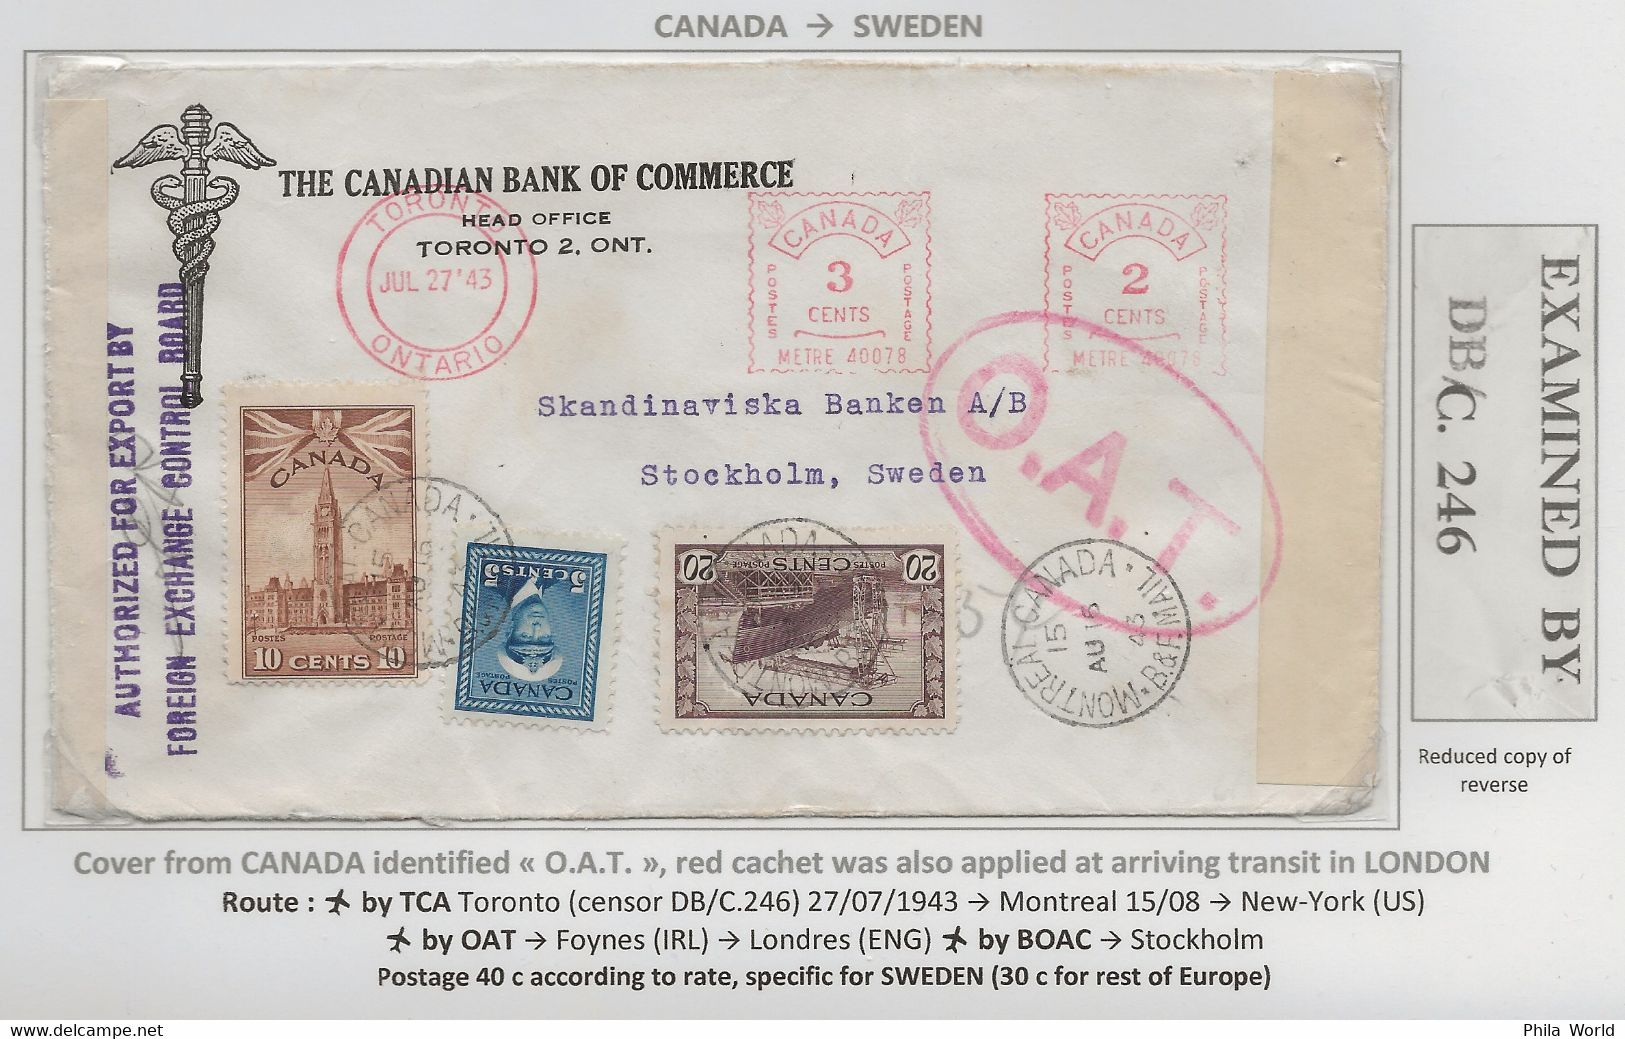 OAT 1943 CANADA Meter Postage EMA Air Mail Cover > SWEDEN US Censor EXAMINED DB/C 246 Censortape From TORONTO - Covers & Documents